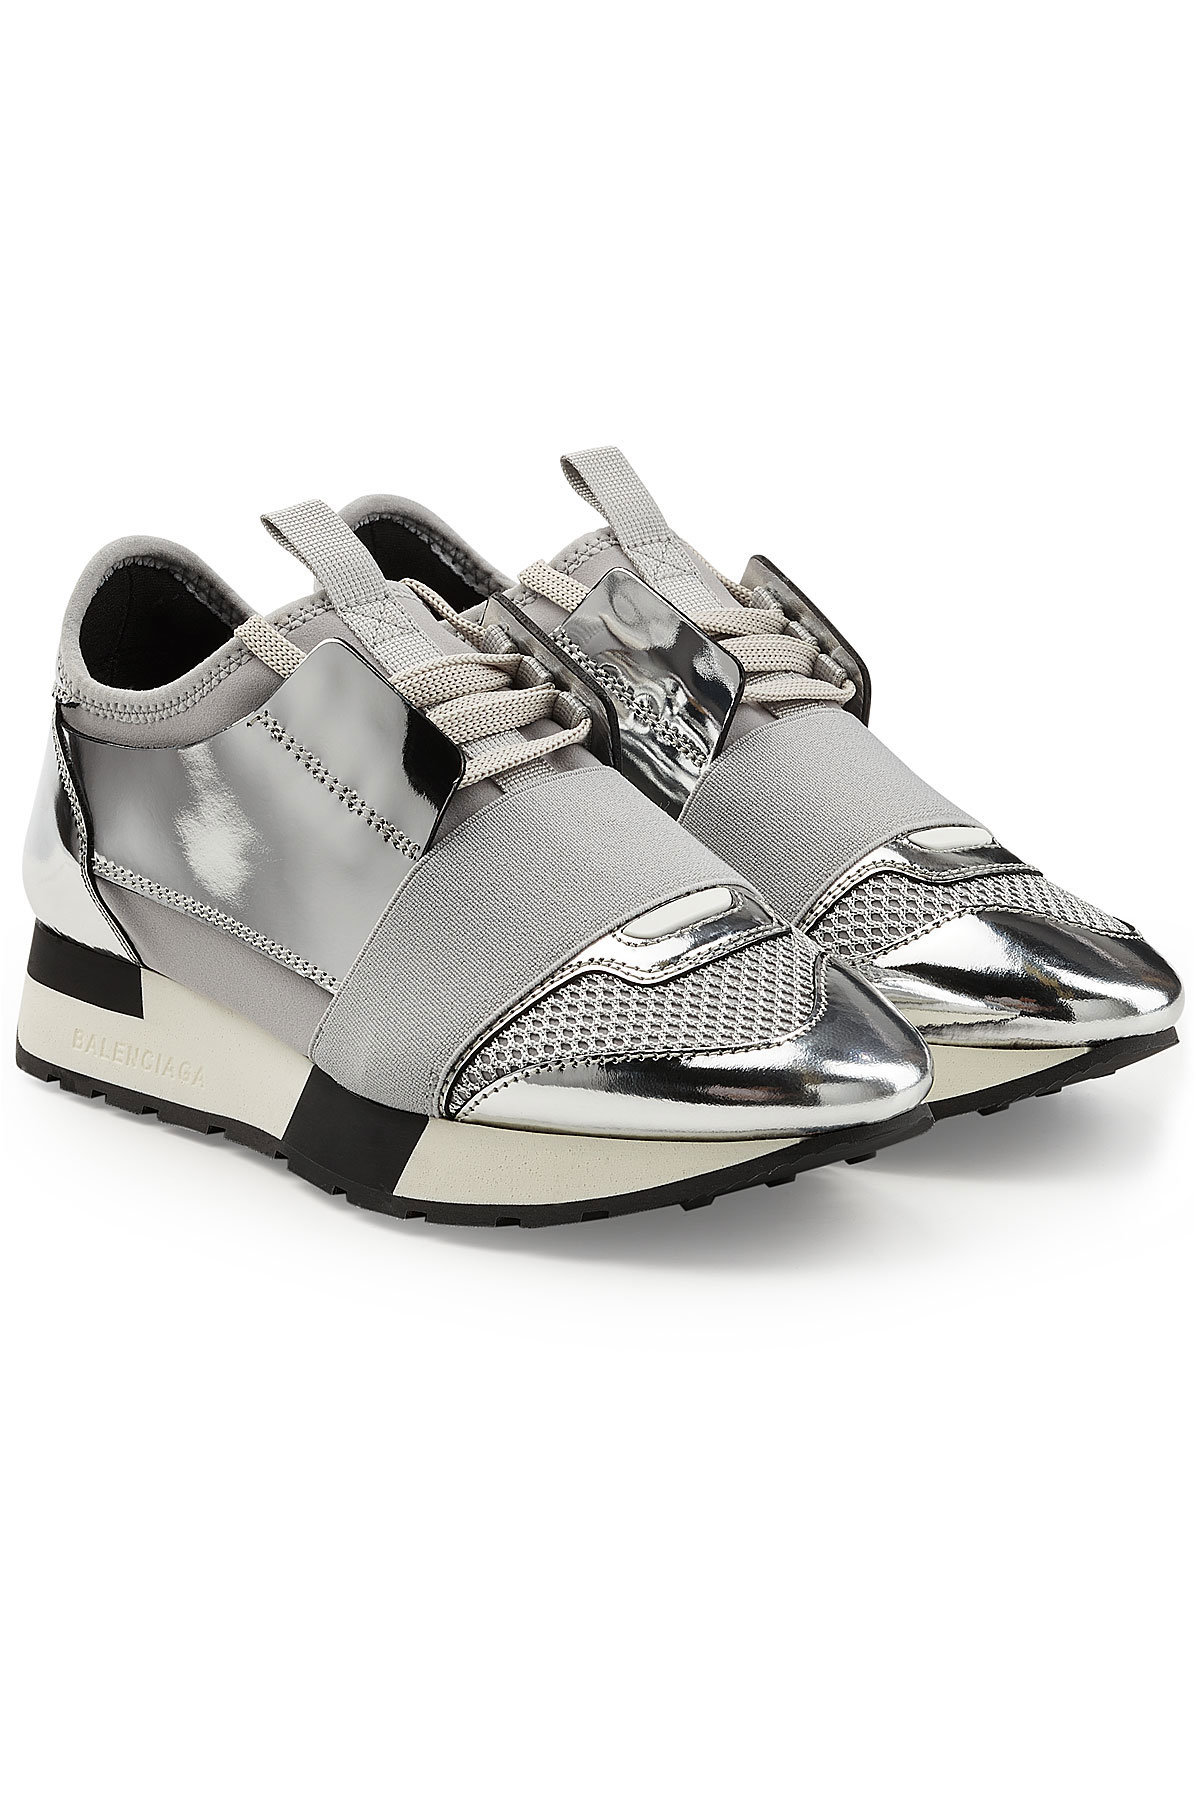 Balenciaga - Race Runner Sneakers with Metallic Leather and Satin